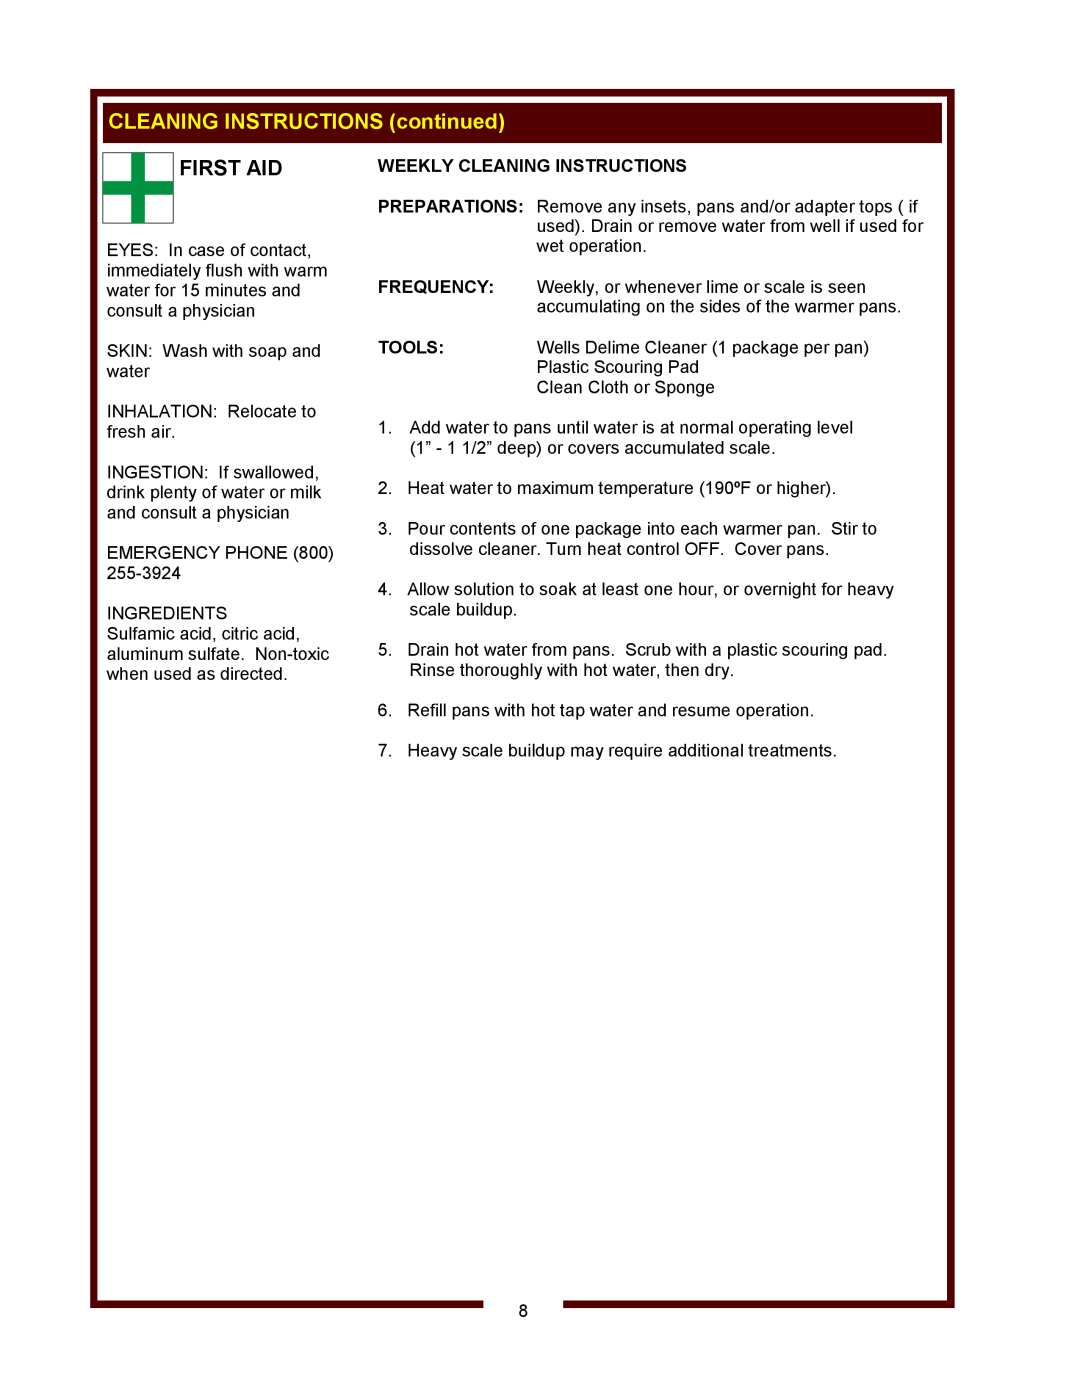 Wells HW-106D, HW/SMP-6D operation manual CLEANING INSTRUCTIONS continued, First Aid, Weekly Cleaning Instructions 